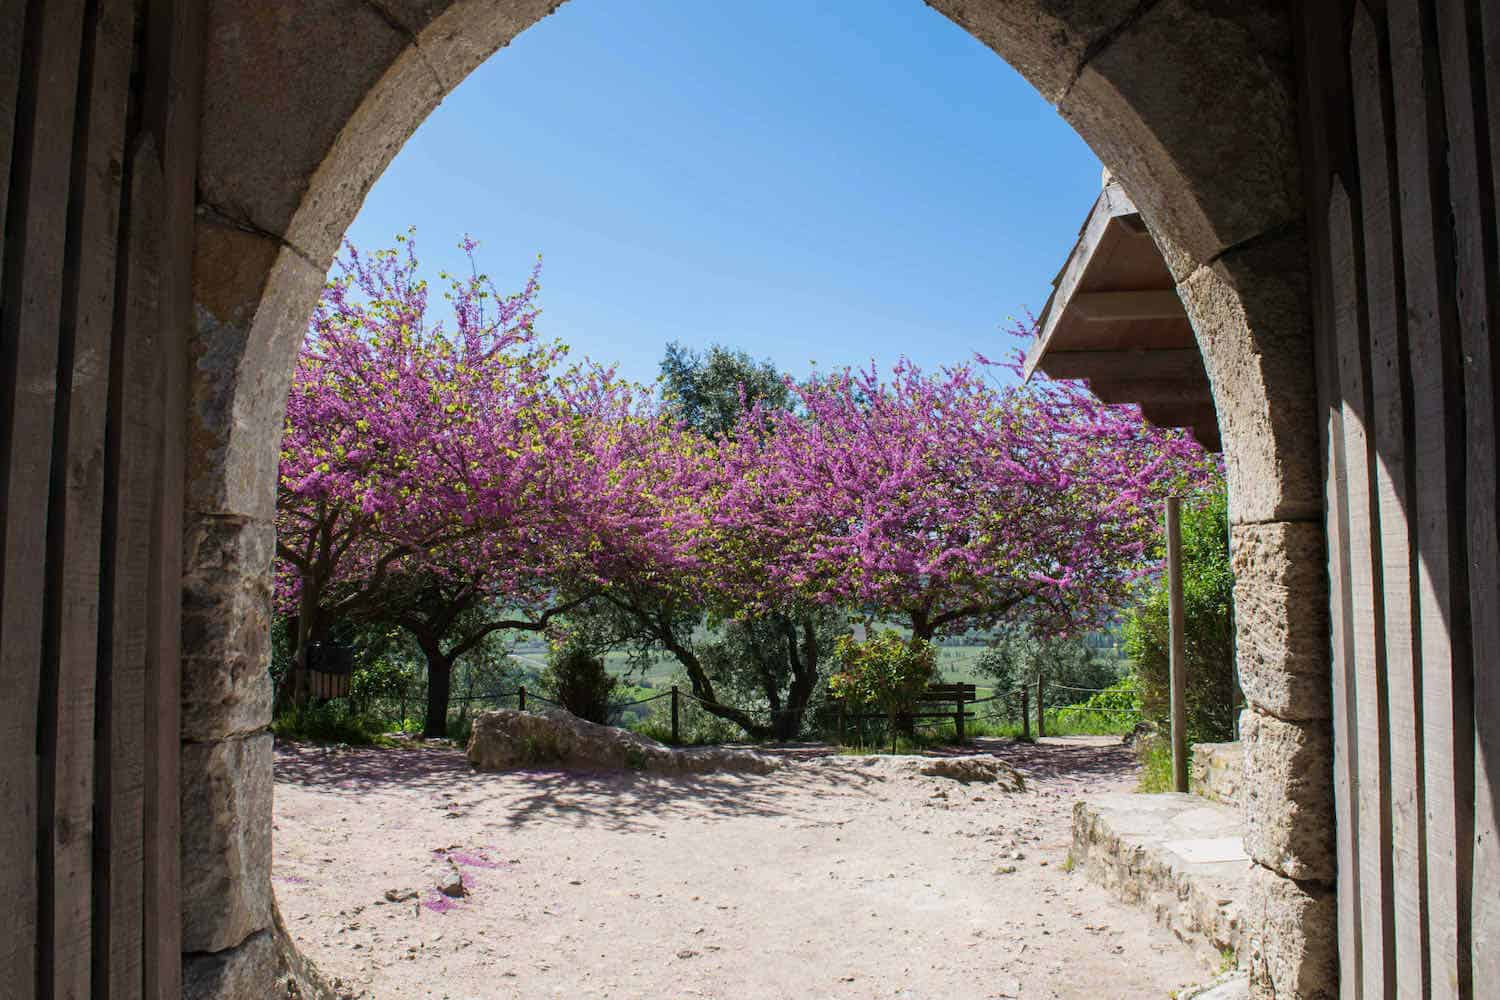 Pink blooming Judas trees as seen through a stone archway in Obidos Portugal